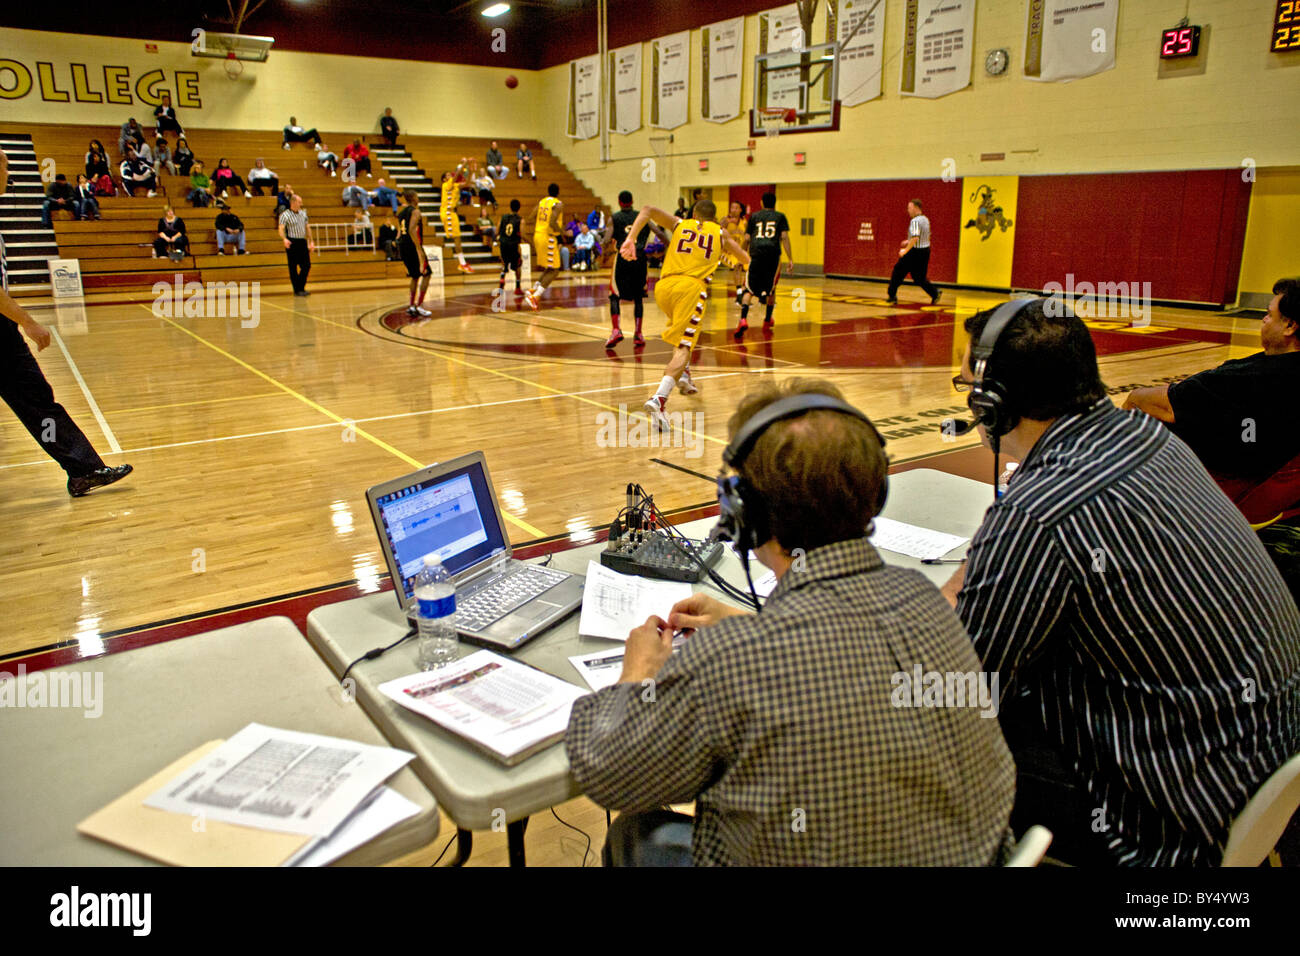 A campus radio announcer (right) provides a running commentary on a basketball game in the college gymnasium . Stock Photo